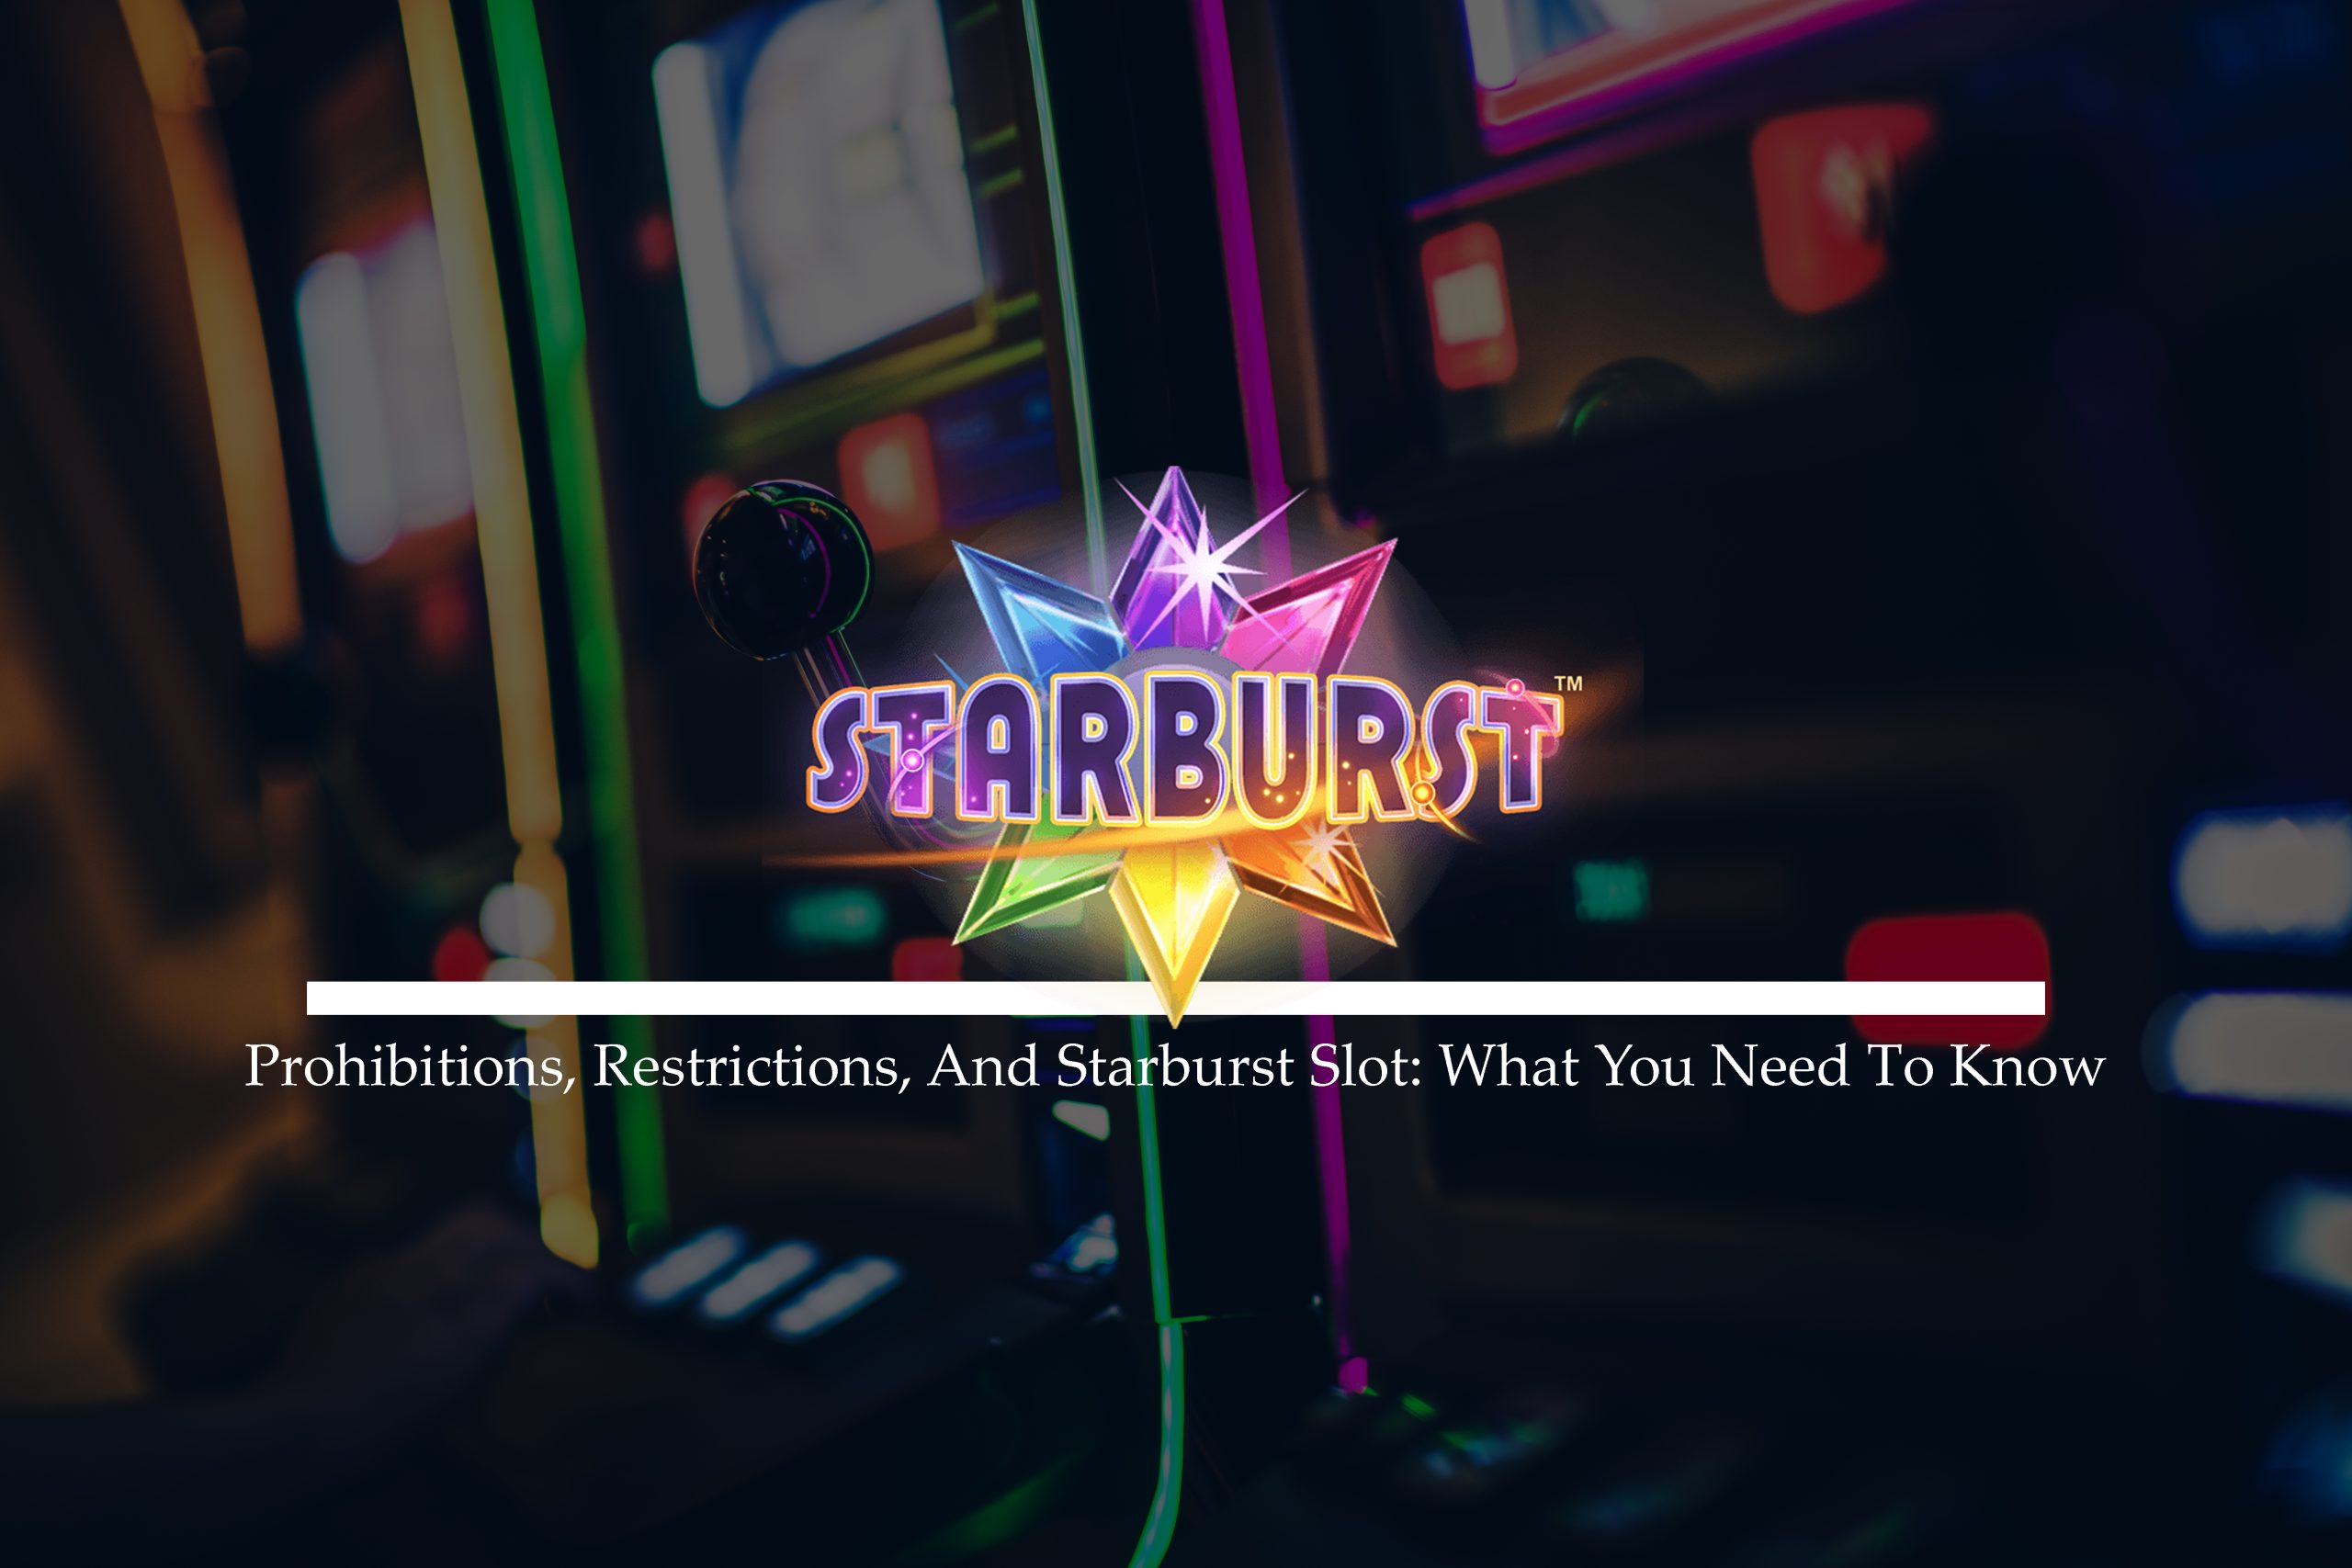 Prohibitions, Restrictions, And Starburst Slot: What You Need To Know